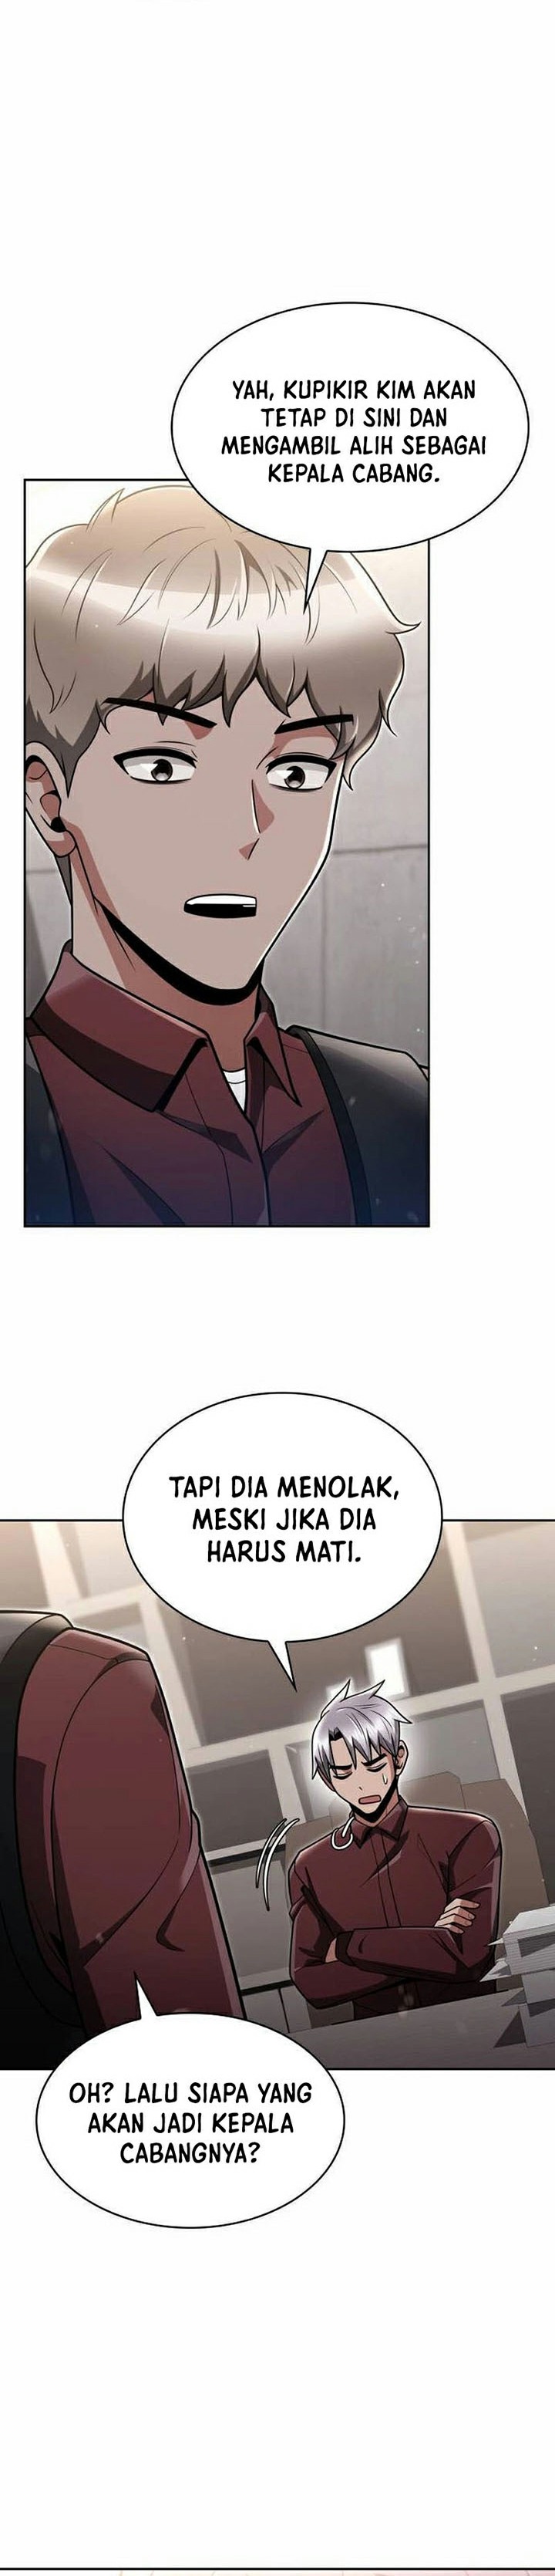 Dilarang COPAS - situs resmi www.mangacanblog.com - Komik clever cleaning life of the returned genius hunter 062 - chapter 62 63 Indonesia clever cleaning life of the returned genius hunter 062 - chapter 62 Terbaru 18|Baca Manga Komik Indonesia|Mangacan